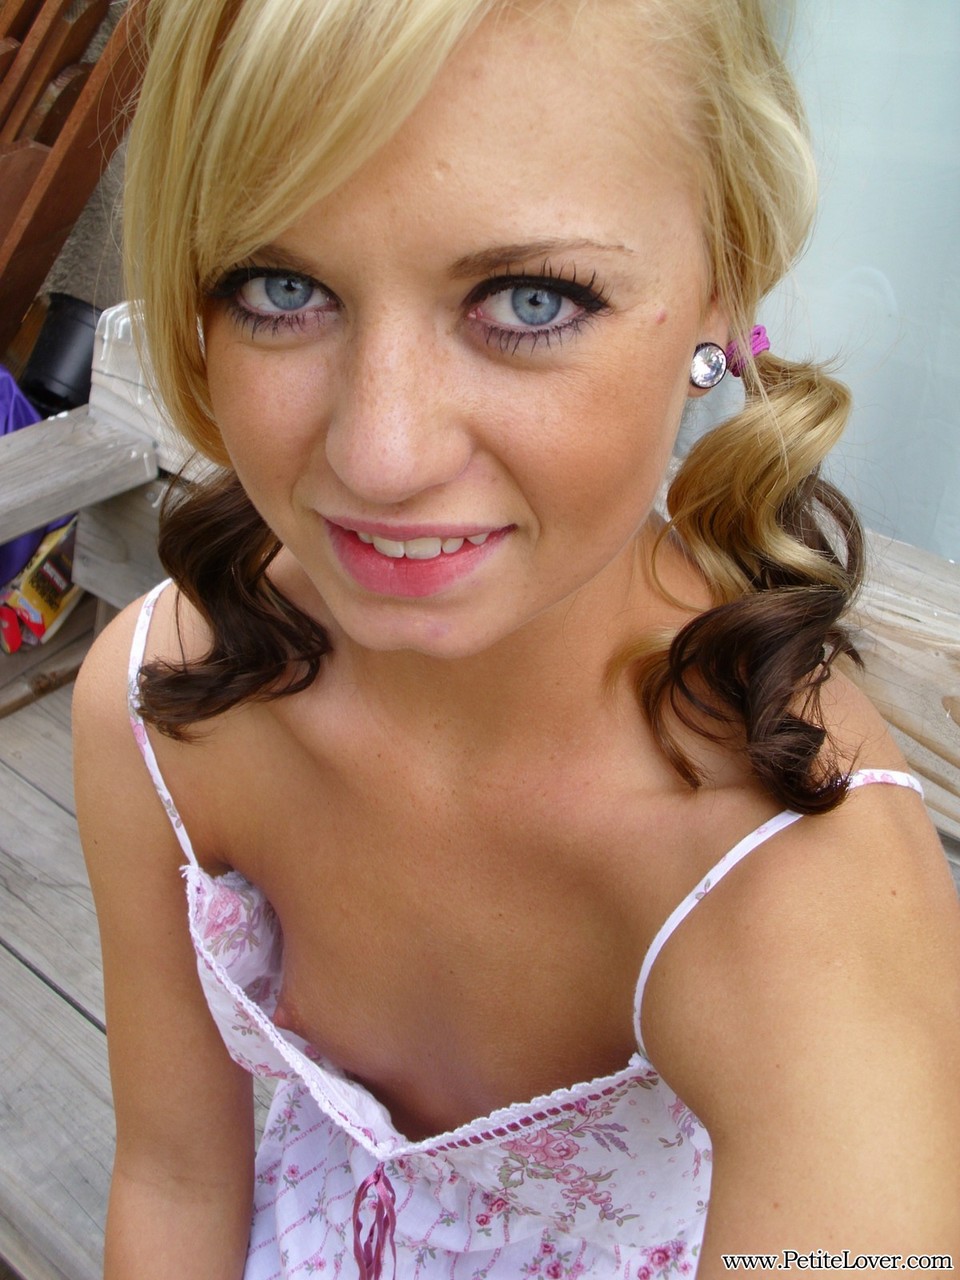 Cute blonde Tiff in pigtails showing off her wee small tits & tiny bald pussy photo porno #428478635 | Petite Lover Pics, Tiff, Amateur, porno mobile